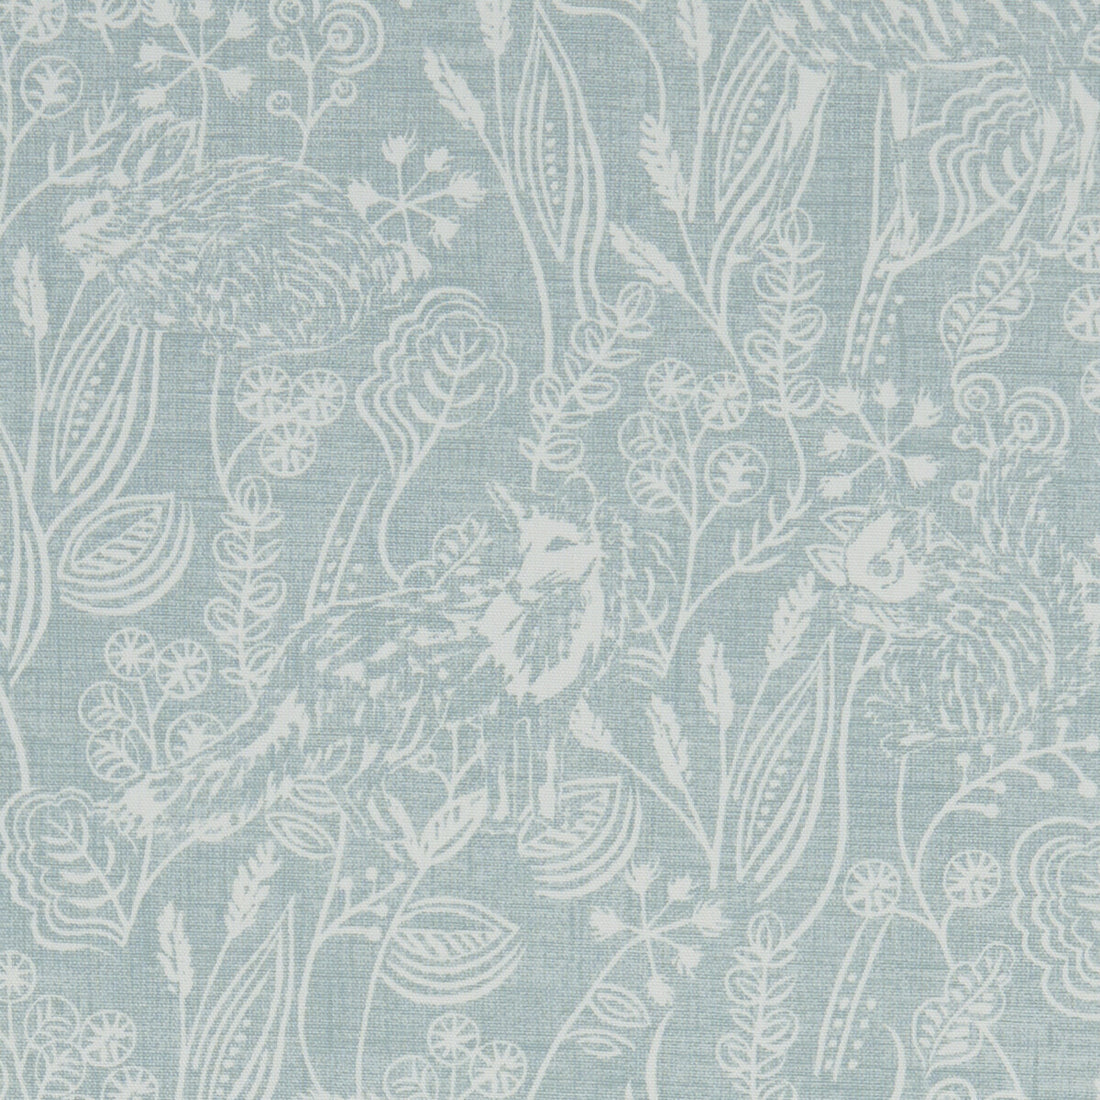 Westleton fabric in duckegg color - pattern F1197/01.CAC.0 - by Clarke And Clarke in the Land &amp; Sea By Studio G For C&amp;C collection